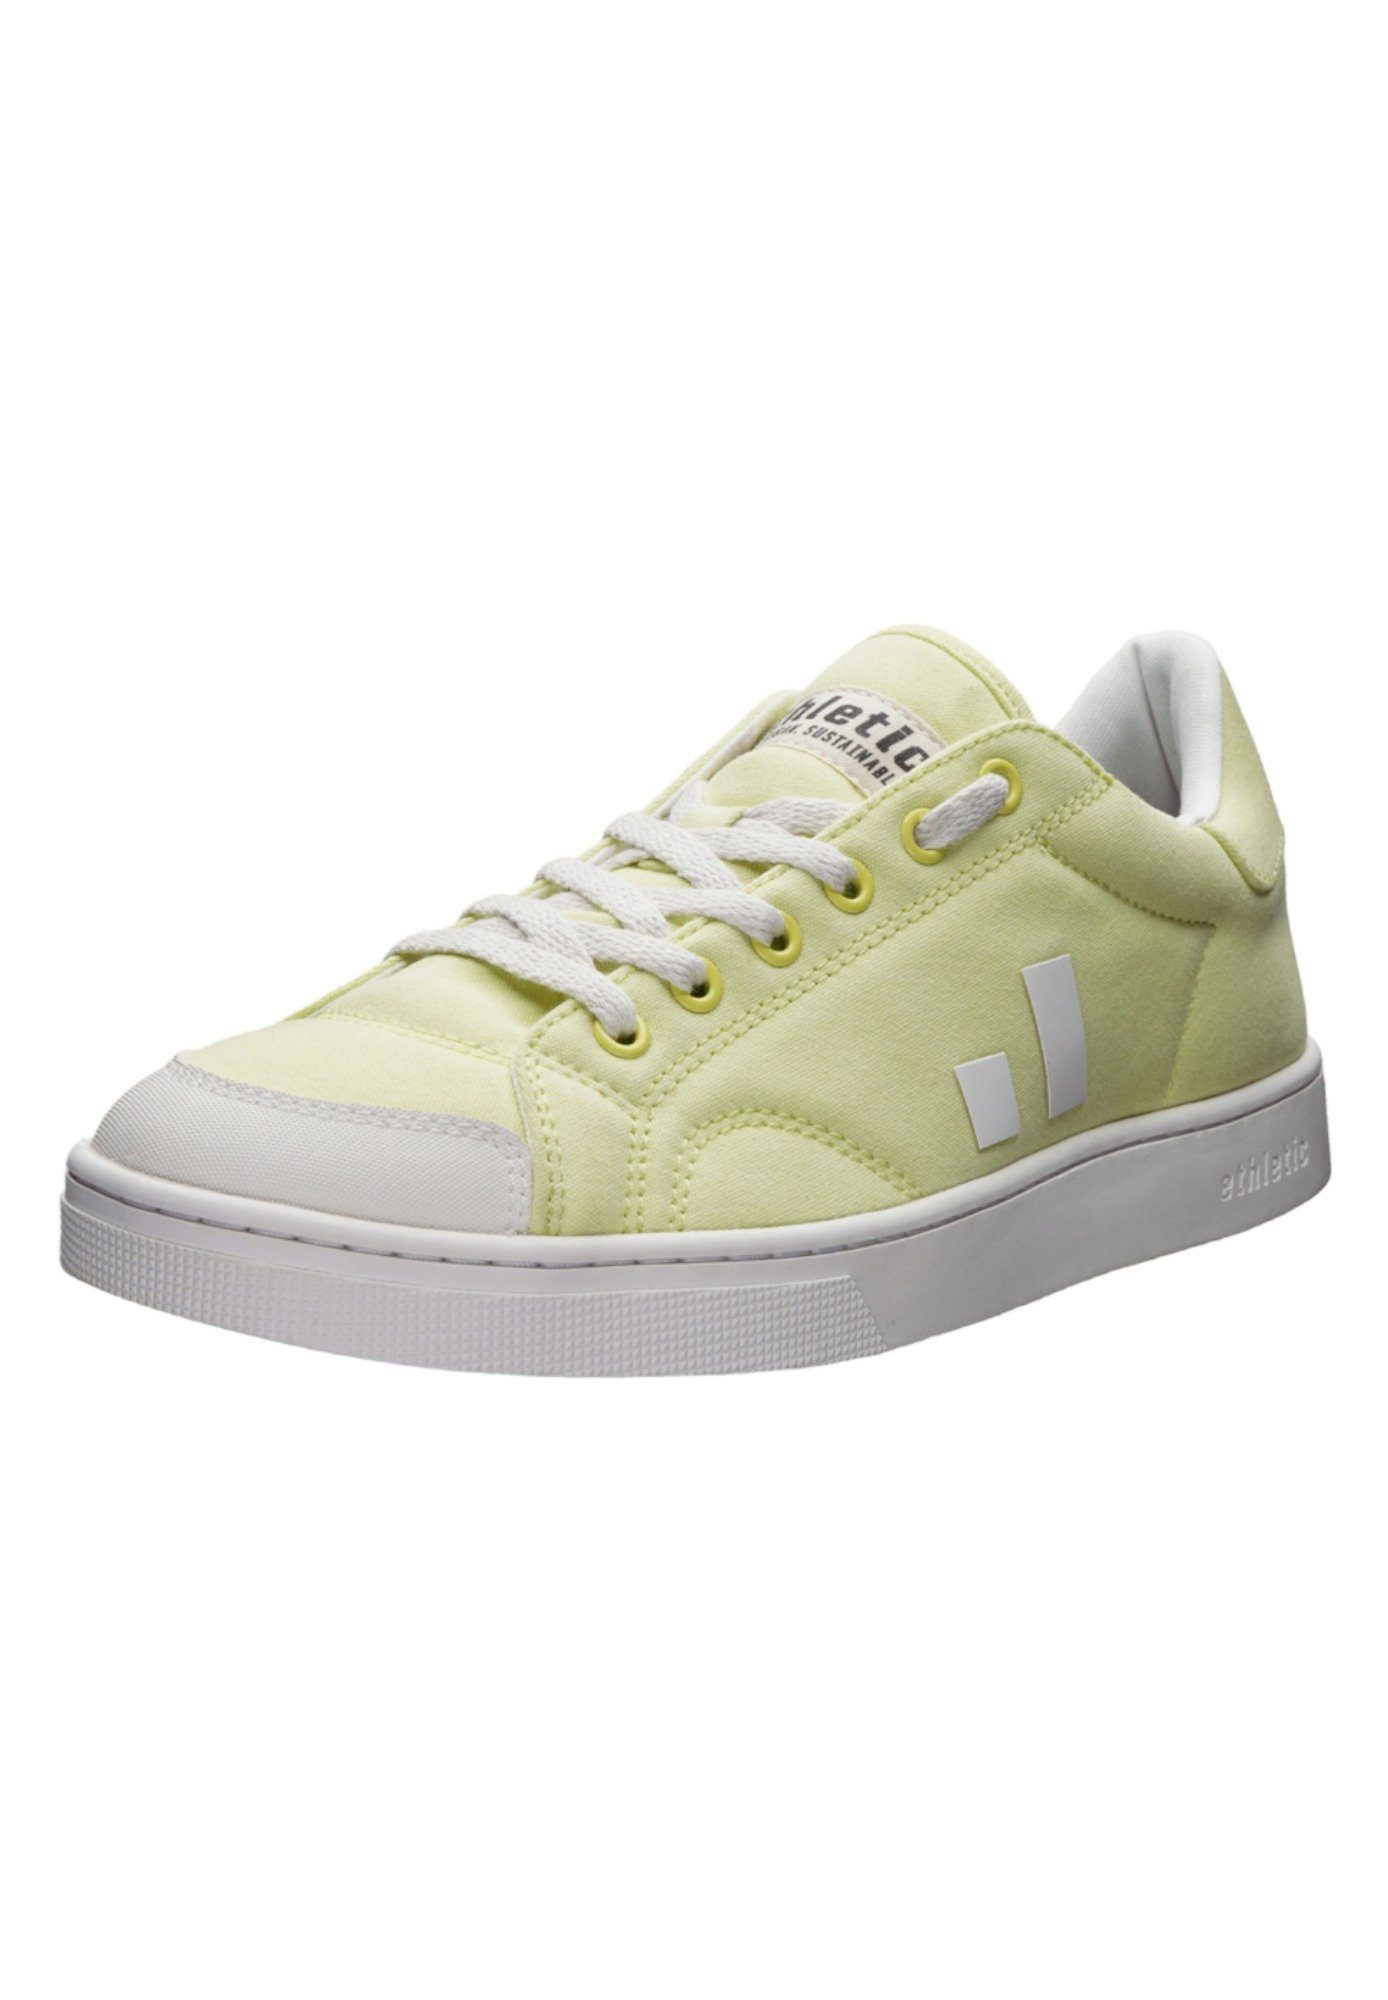 ETHLETIC Active Lo Cut Sneaker Fairtrade Produkt Lime Yellow - Just White